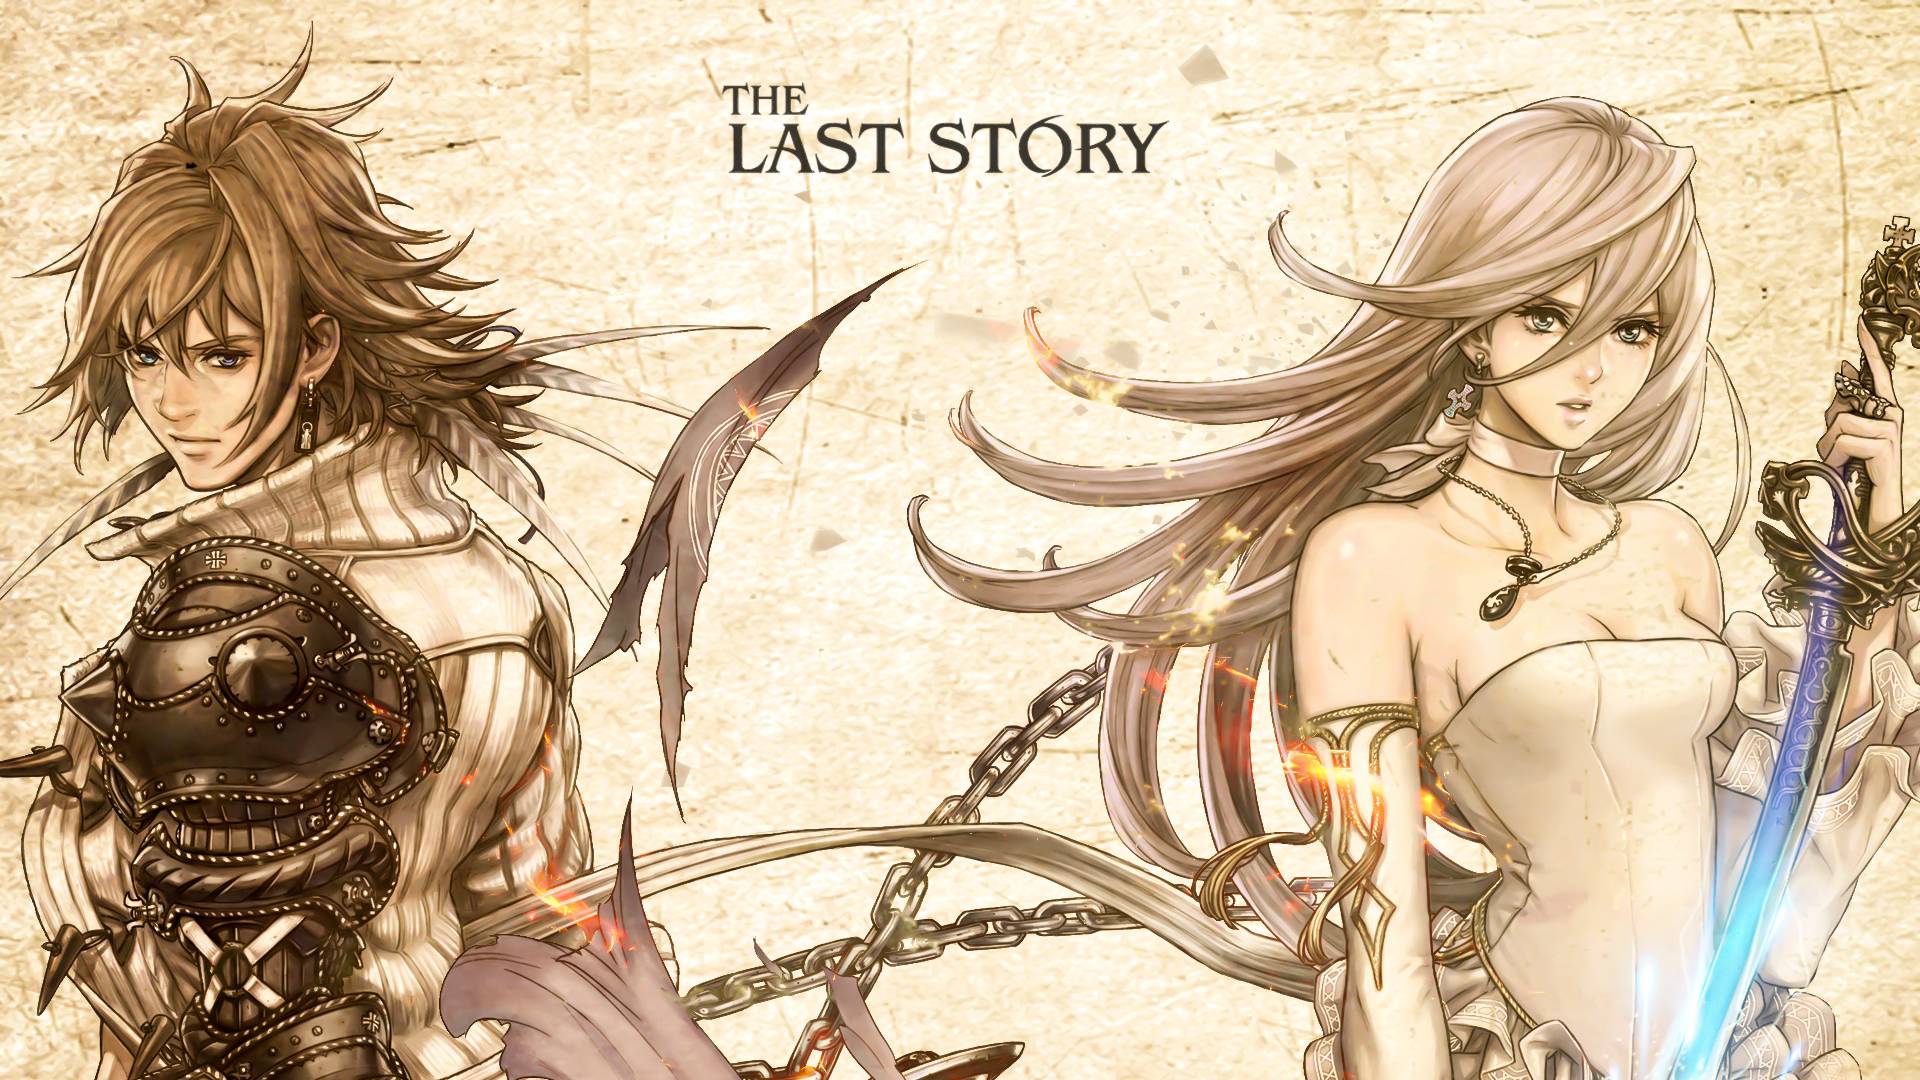 The Last Story Wallpapers - Wallpaper Cave